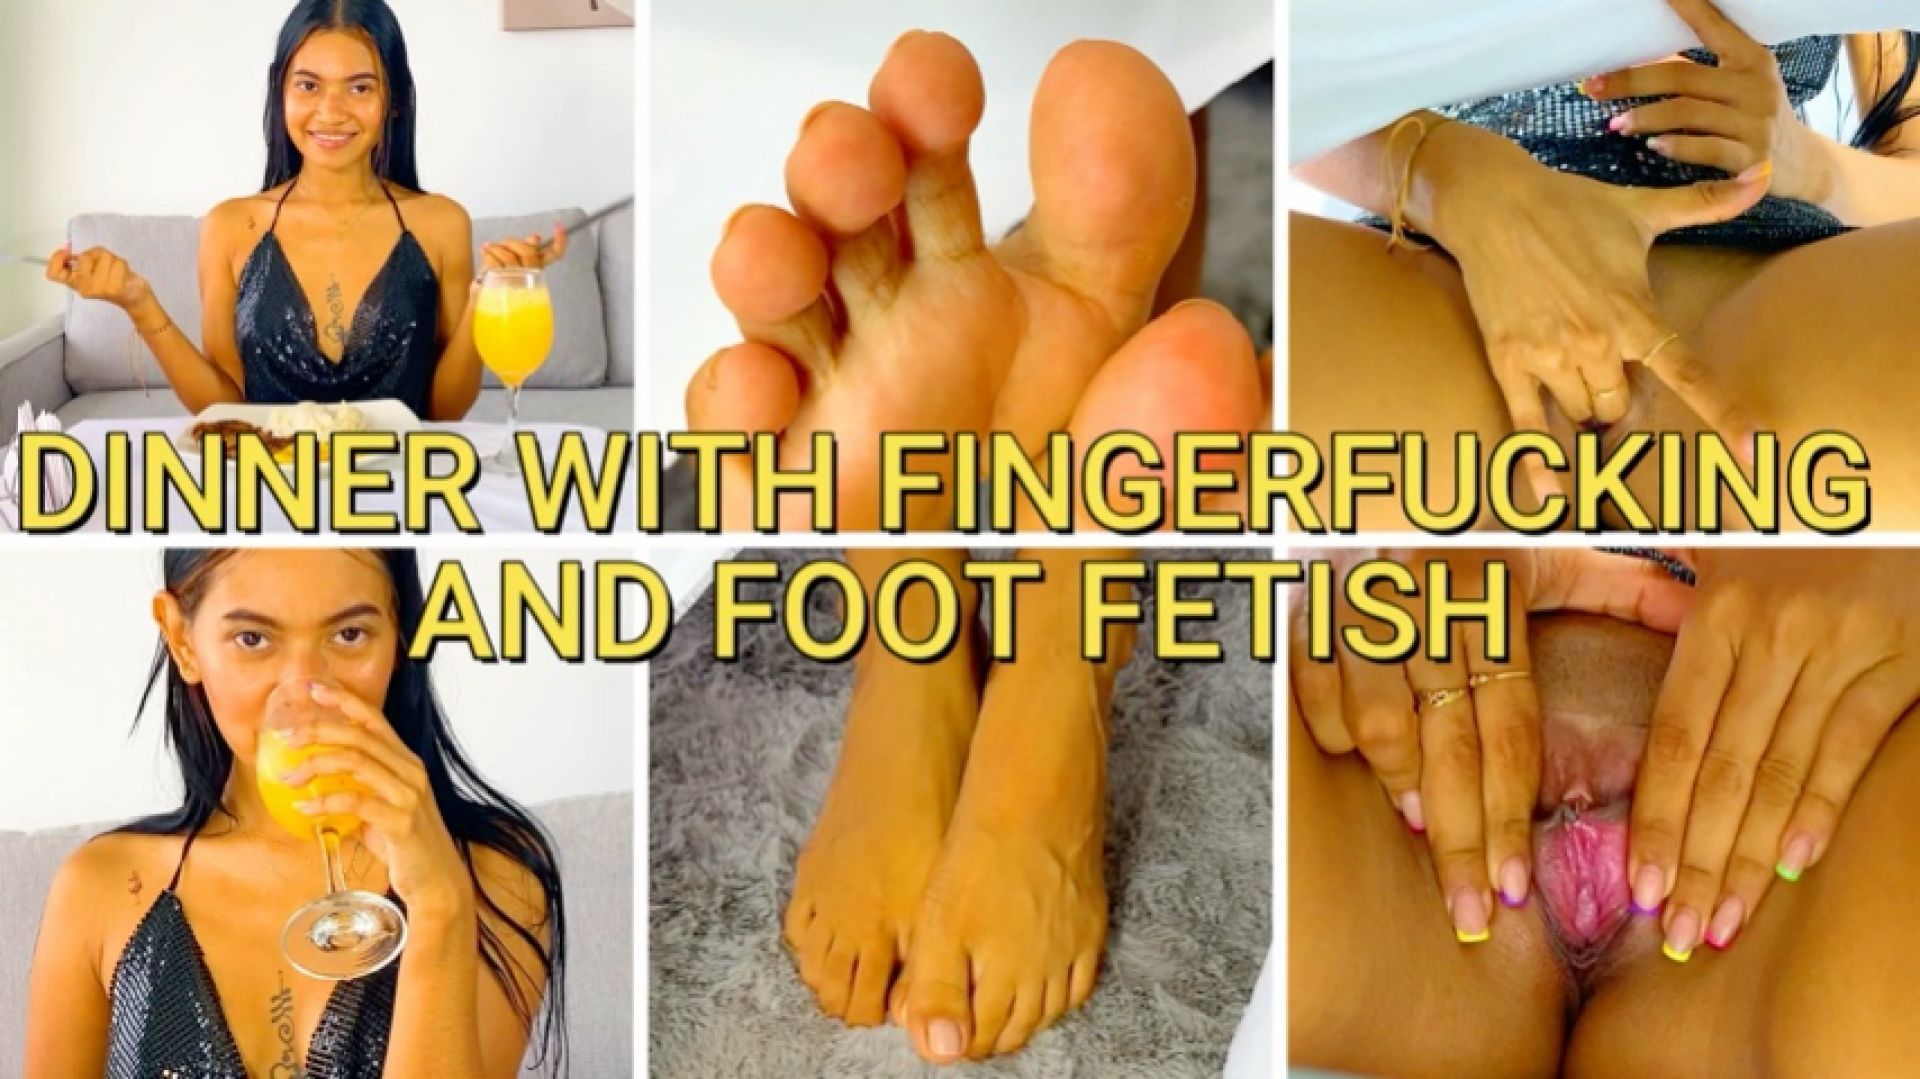 DINNER WITH FINGERFUCKKING AND FOOT FETISH